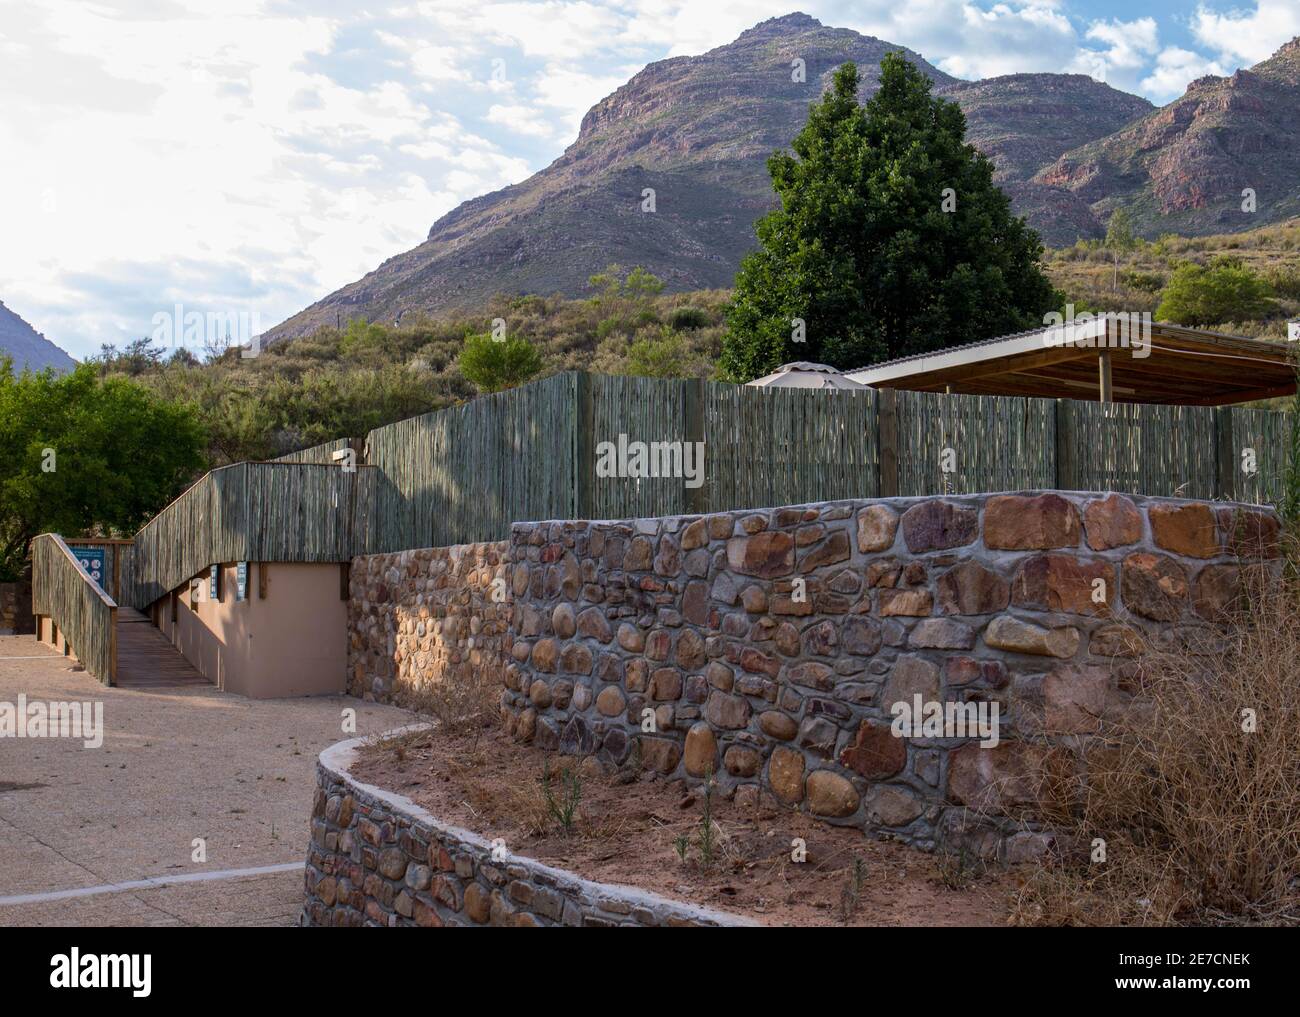 Algeria Wilderness Area, South Africa - chalet family accommodation at this popular recreational destination in the Western Cape Stock Photo